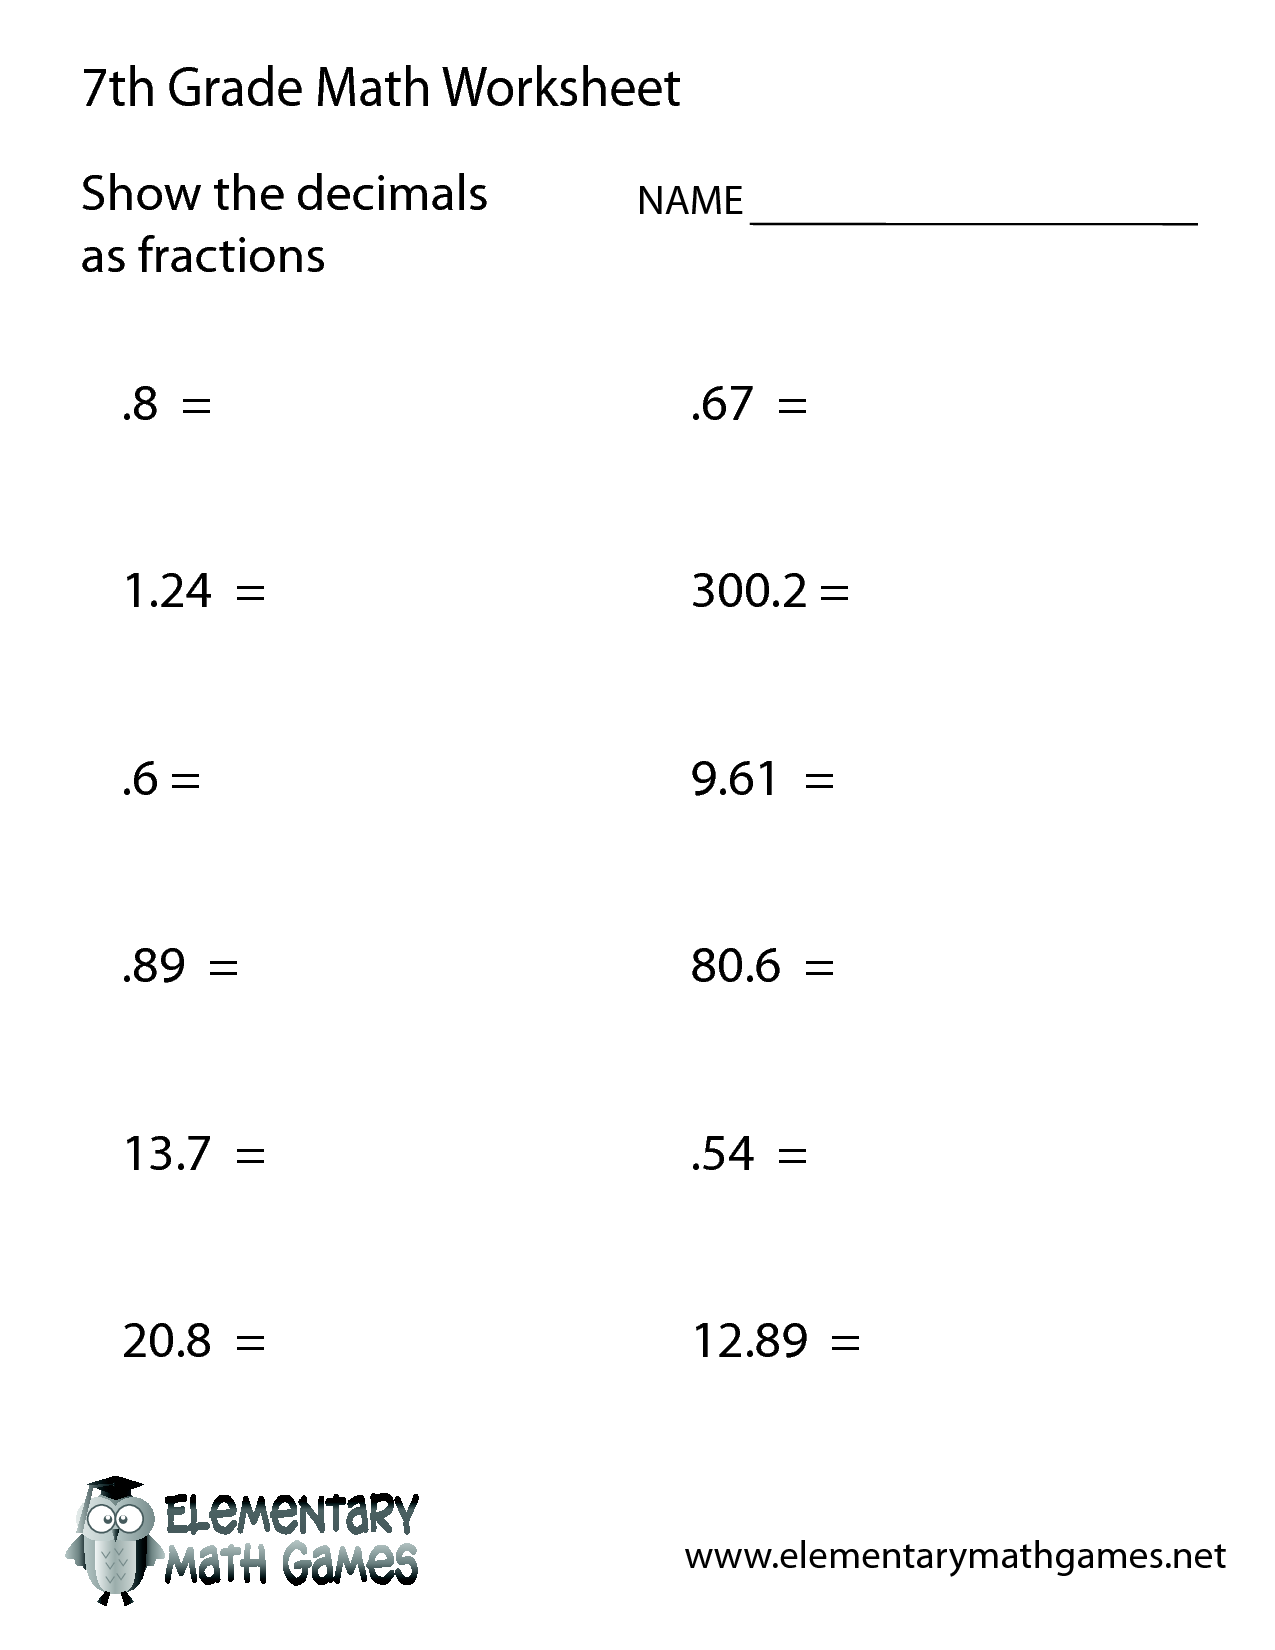 12 Images of 7th Grade Math Equations Worksheets